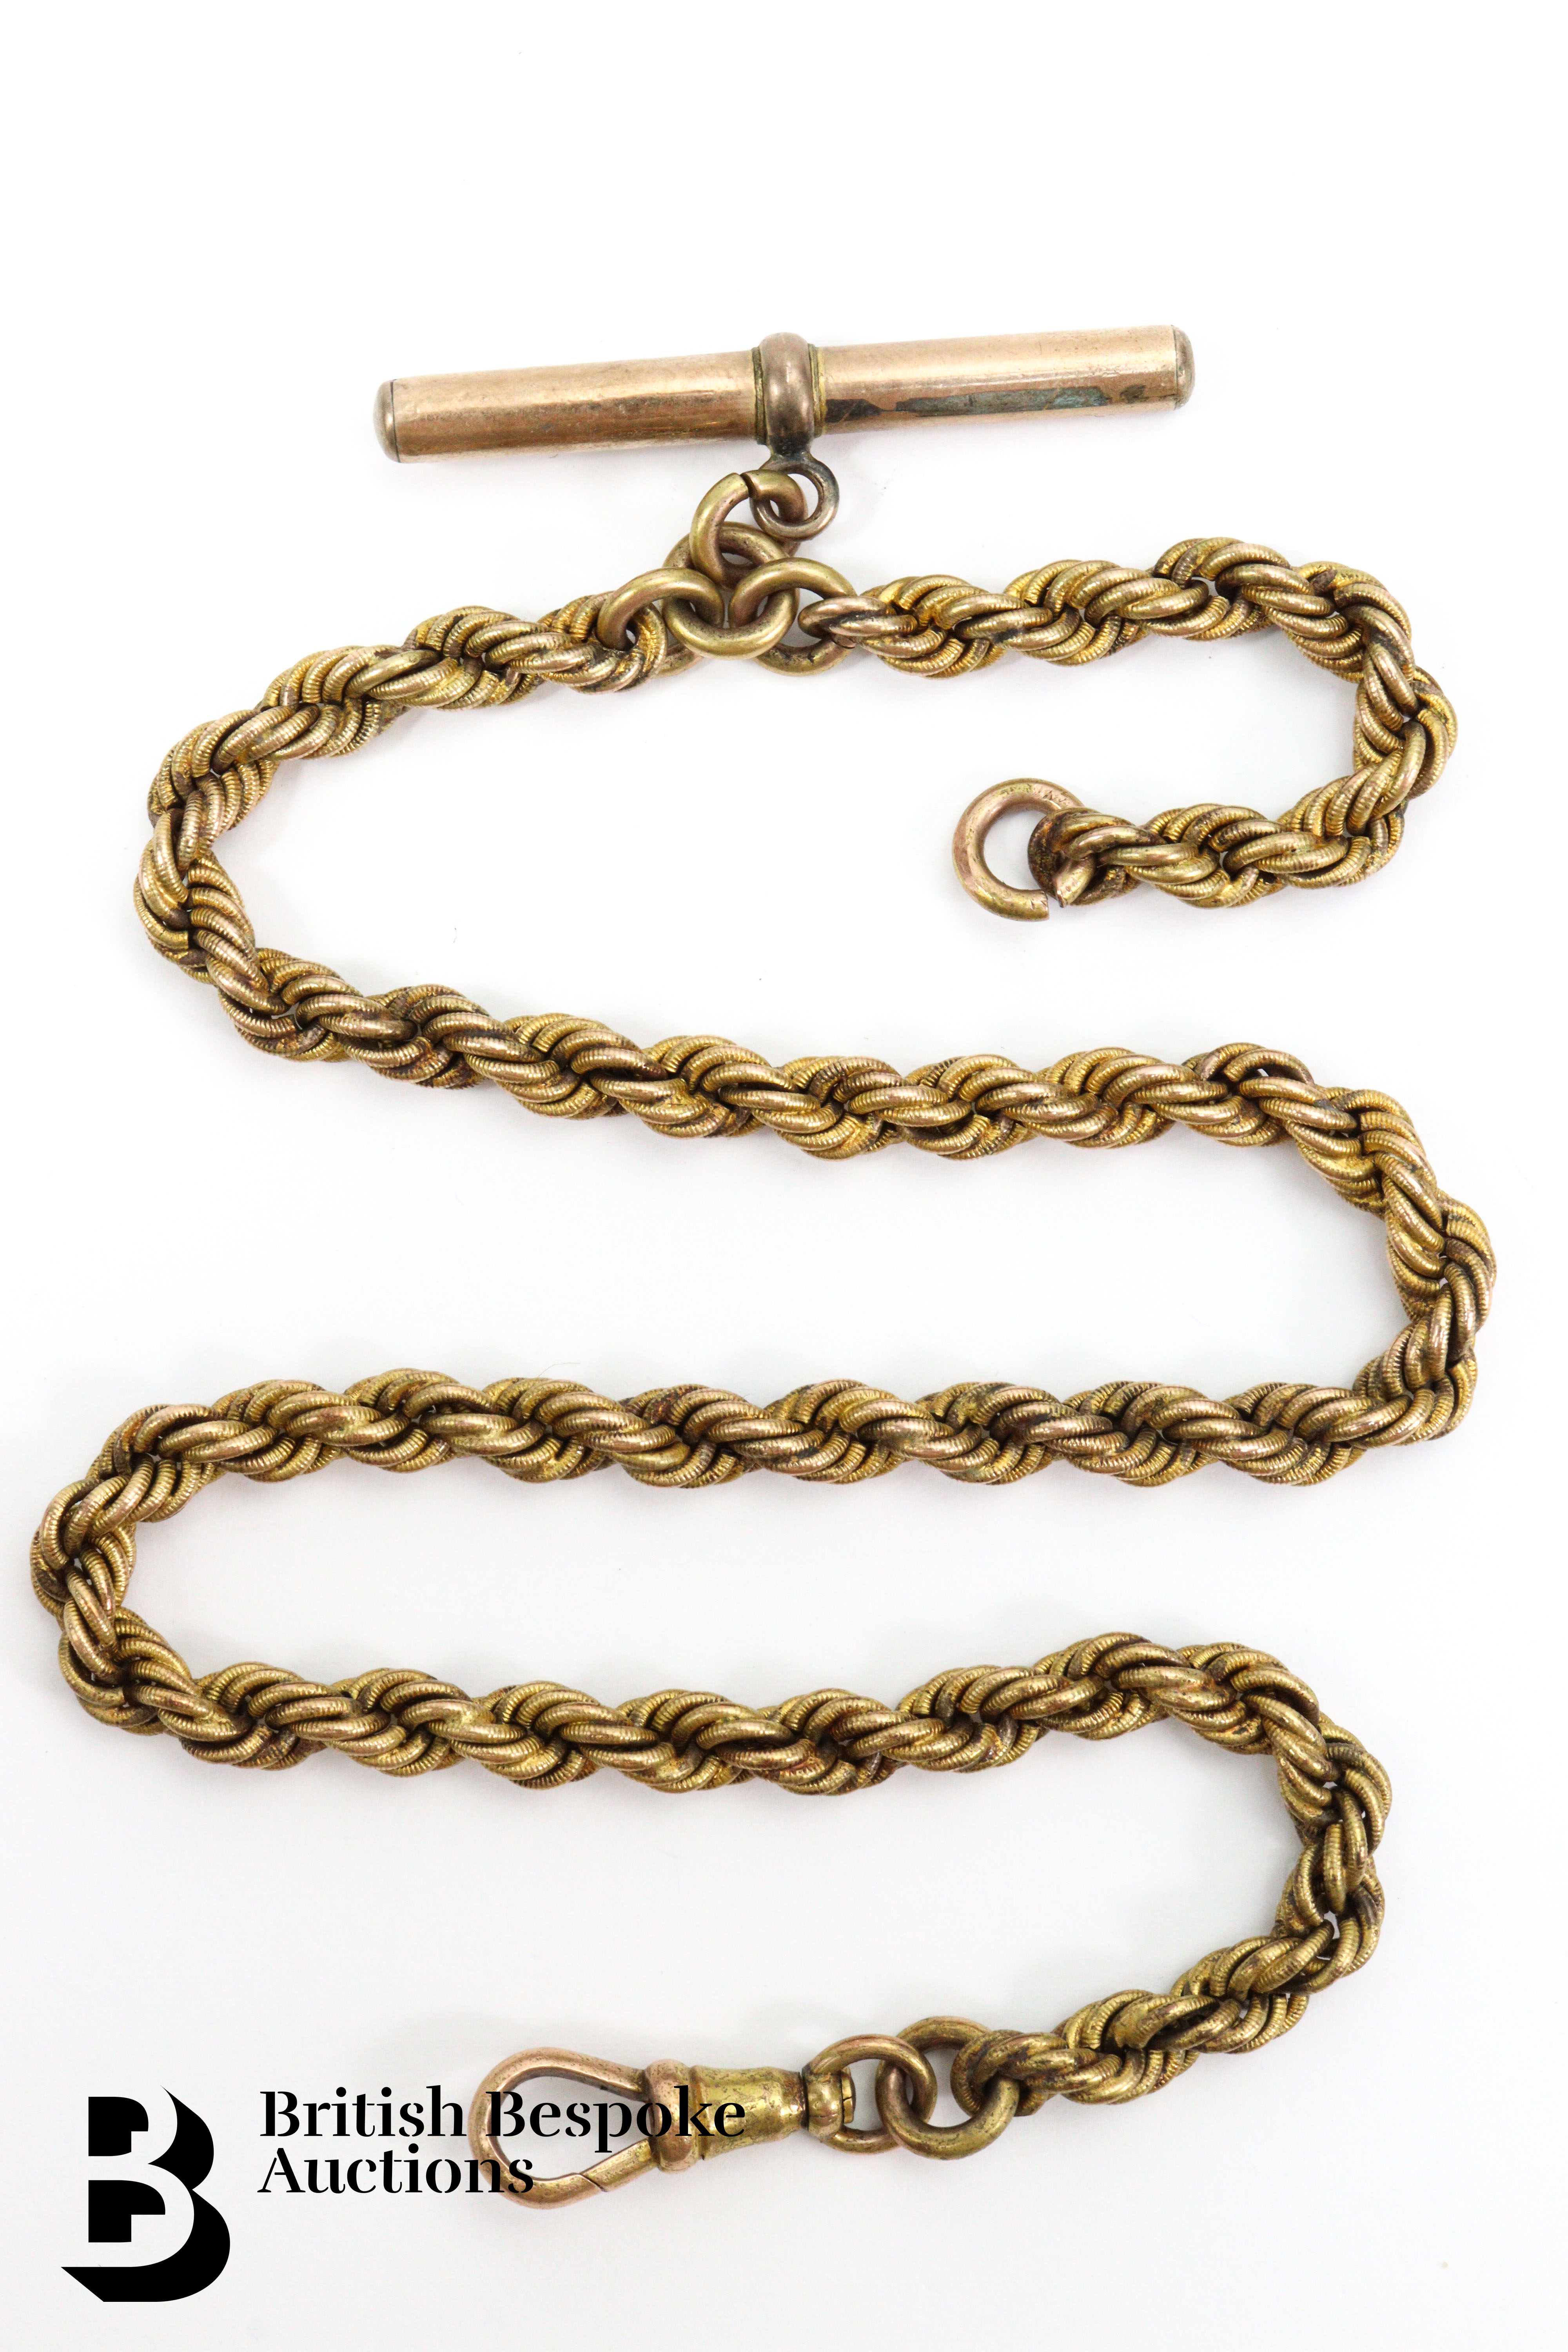 9ct Gold Rope Fob Chain - Image 2 of 7